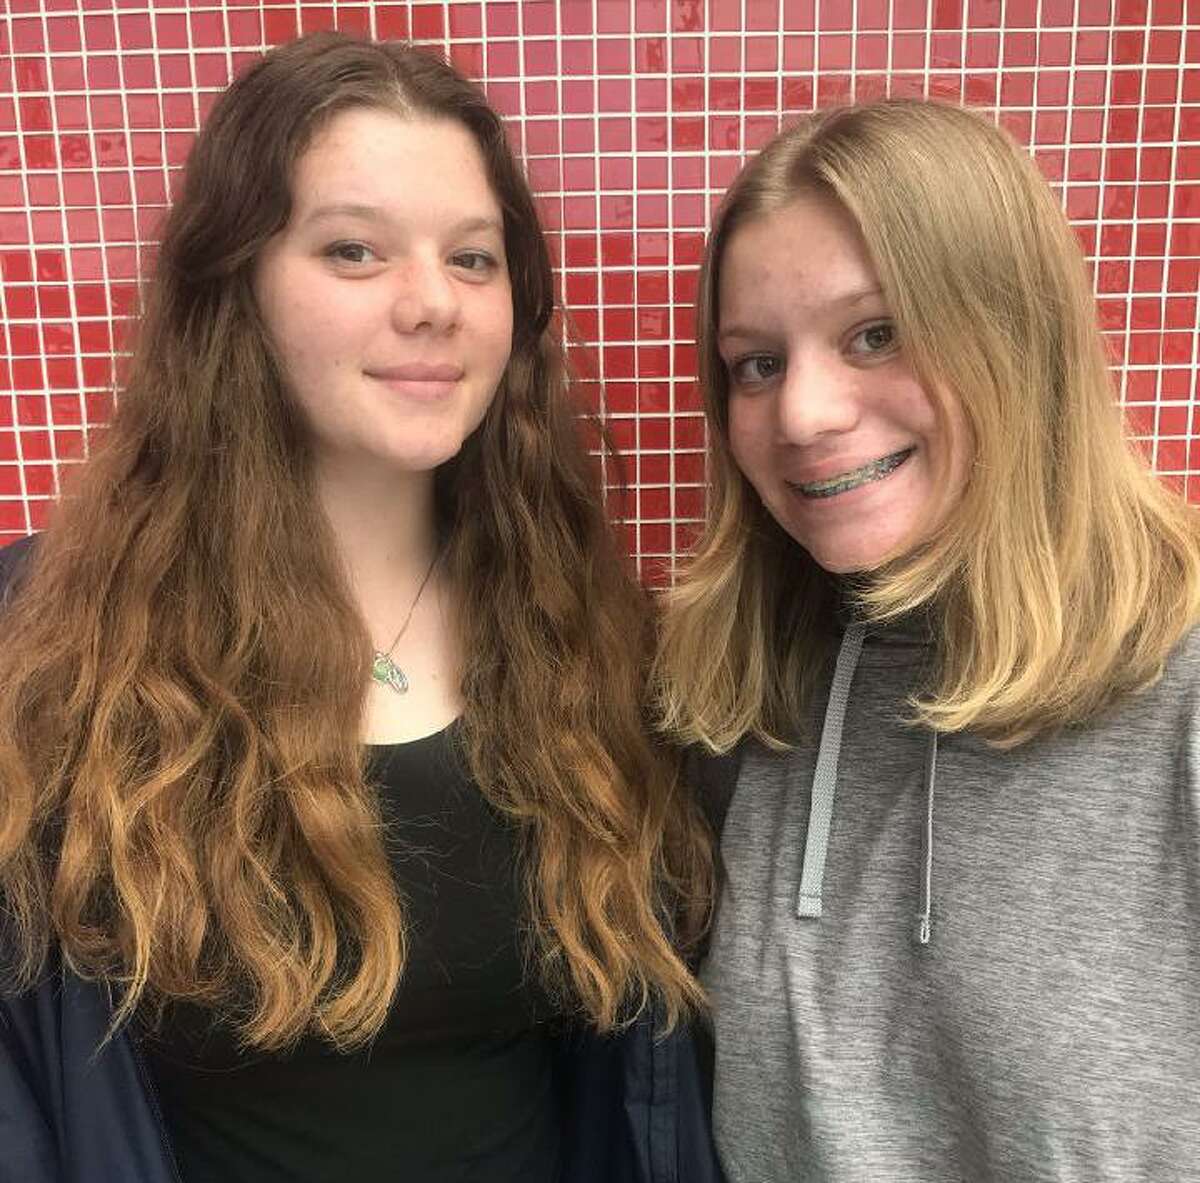 Twins Katherine and Ashley Palombizio, right, who attend CREC Academy of Science and Innovation, turned 18 Friday. The twins were part of a two-car crash on I-84.